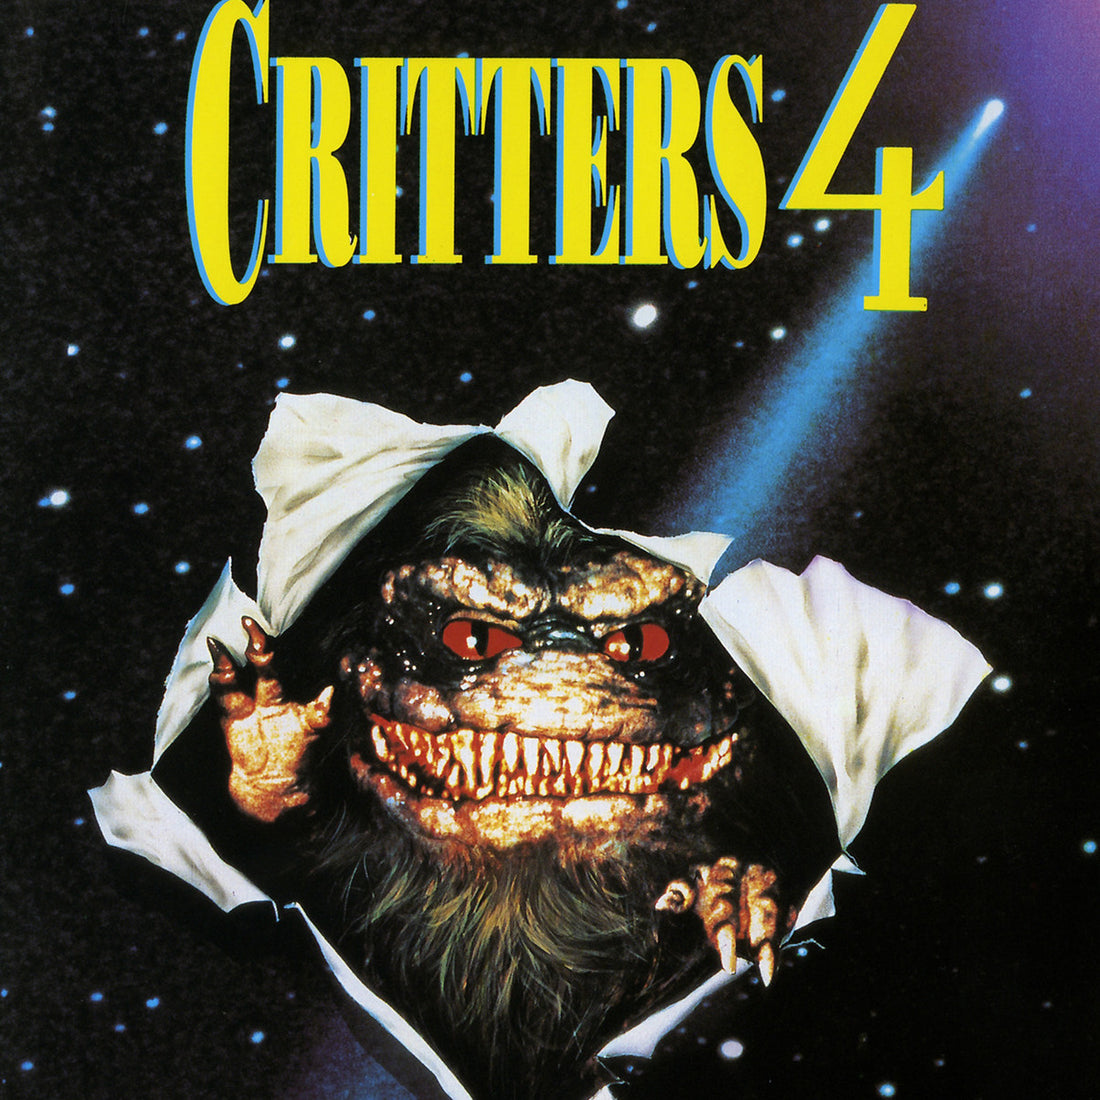 Episode 255: Critters 4